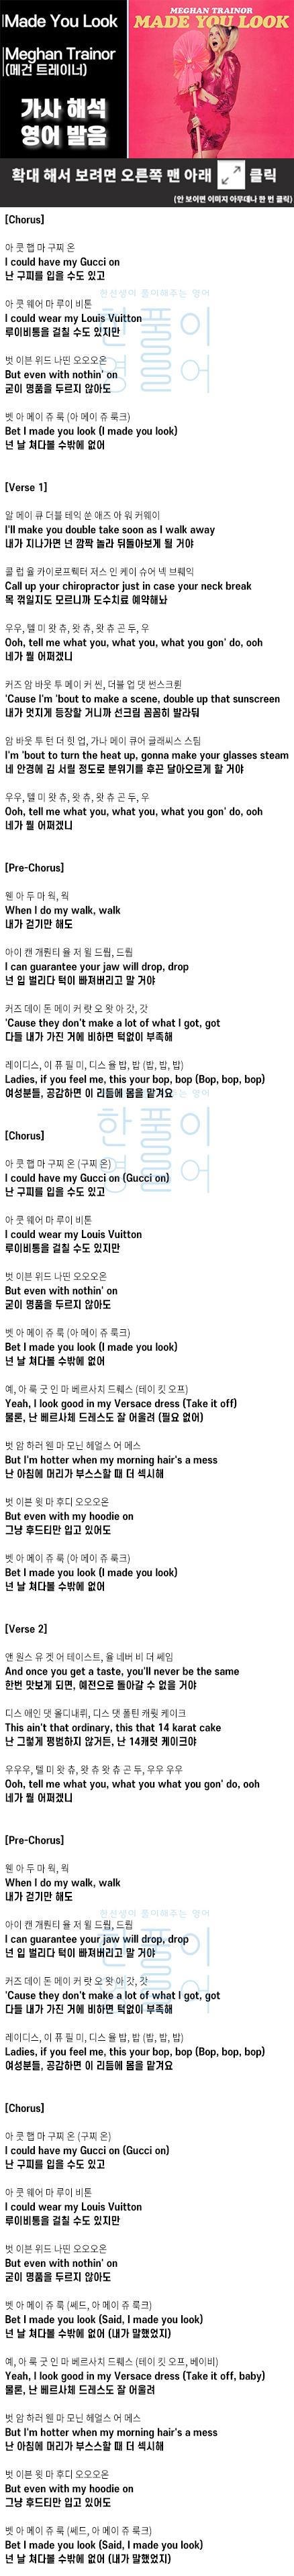 Meghan Trainor - Made You Look (Lyrics)  I could have my Gucci on I could  wear my Louis Vuitton 